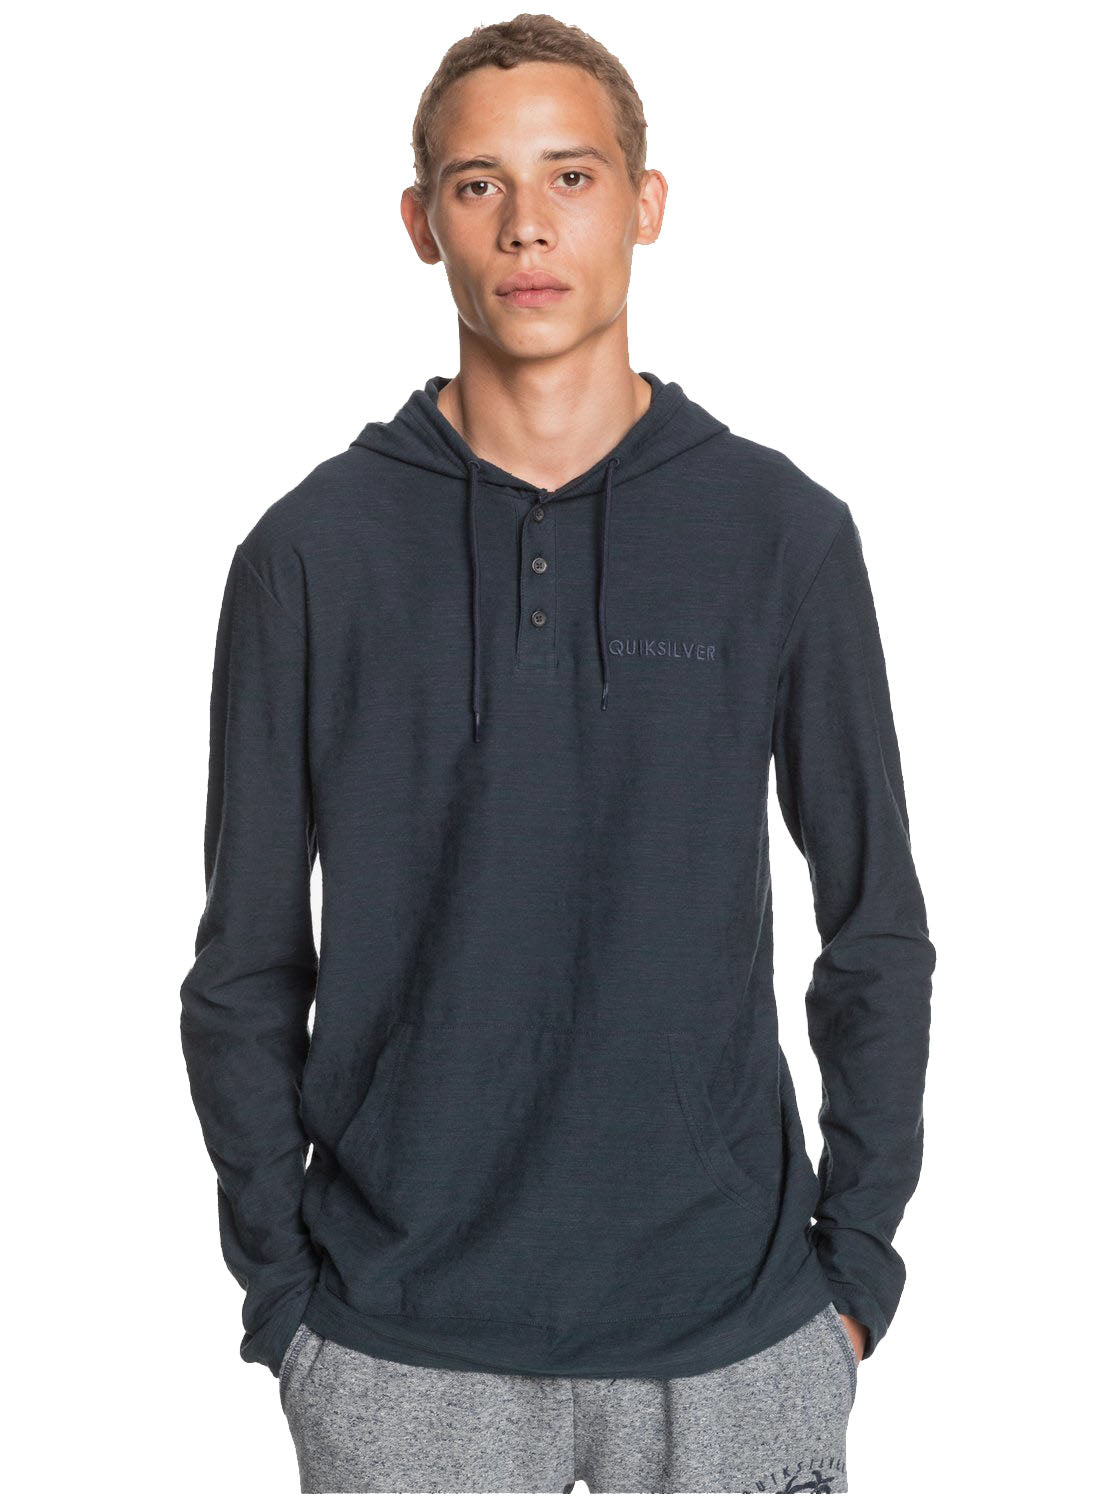 Quiksilver Kentin Long Sleeve Hooded Top BYP3 L